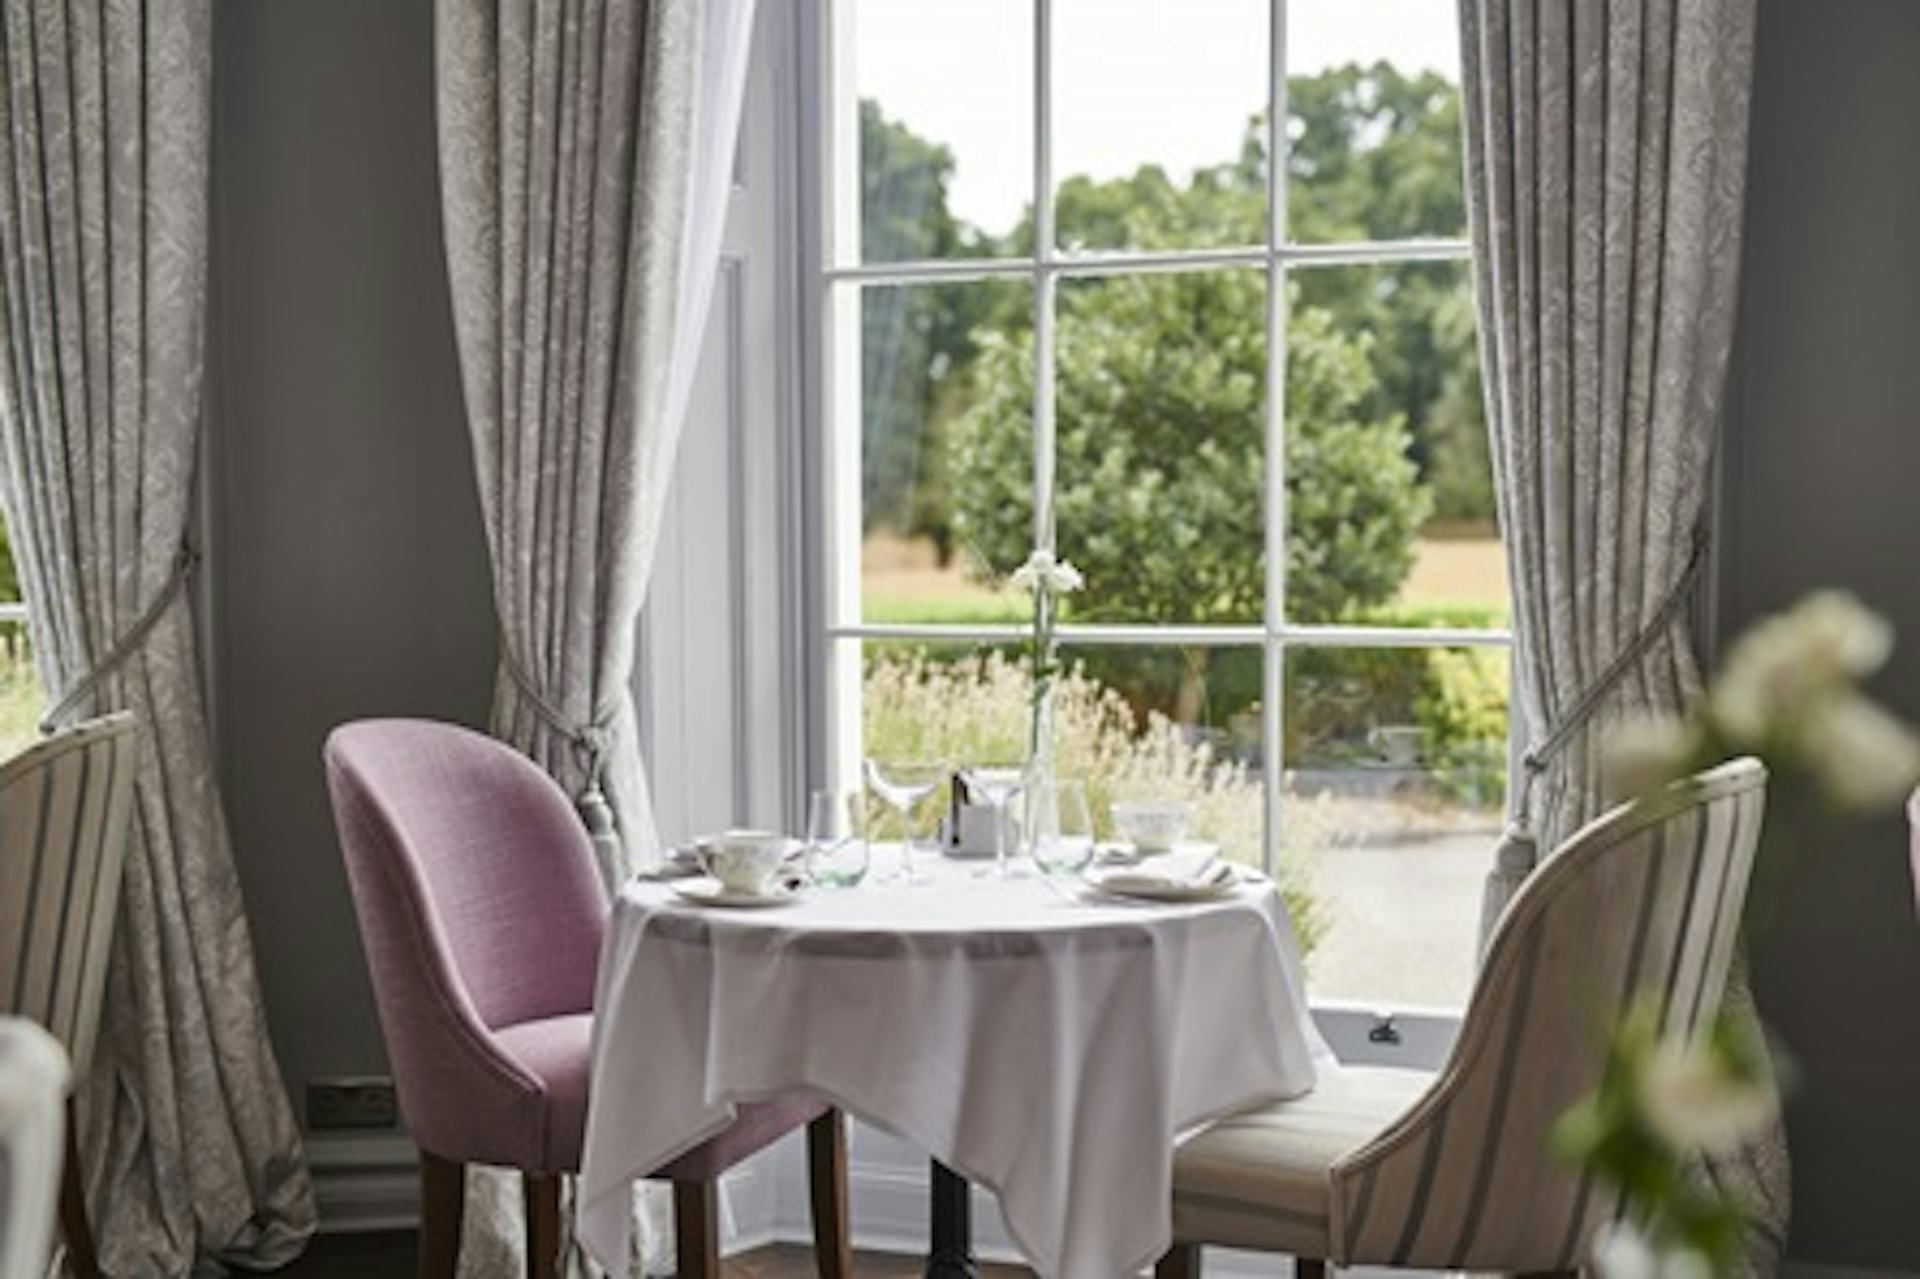 One Night Break for Two at The Burnham Beeches Hotel